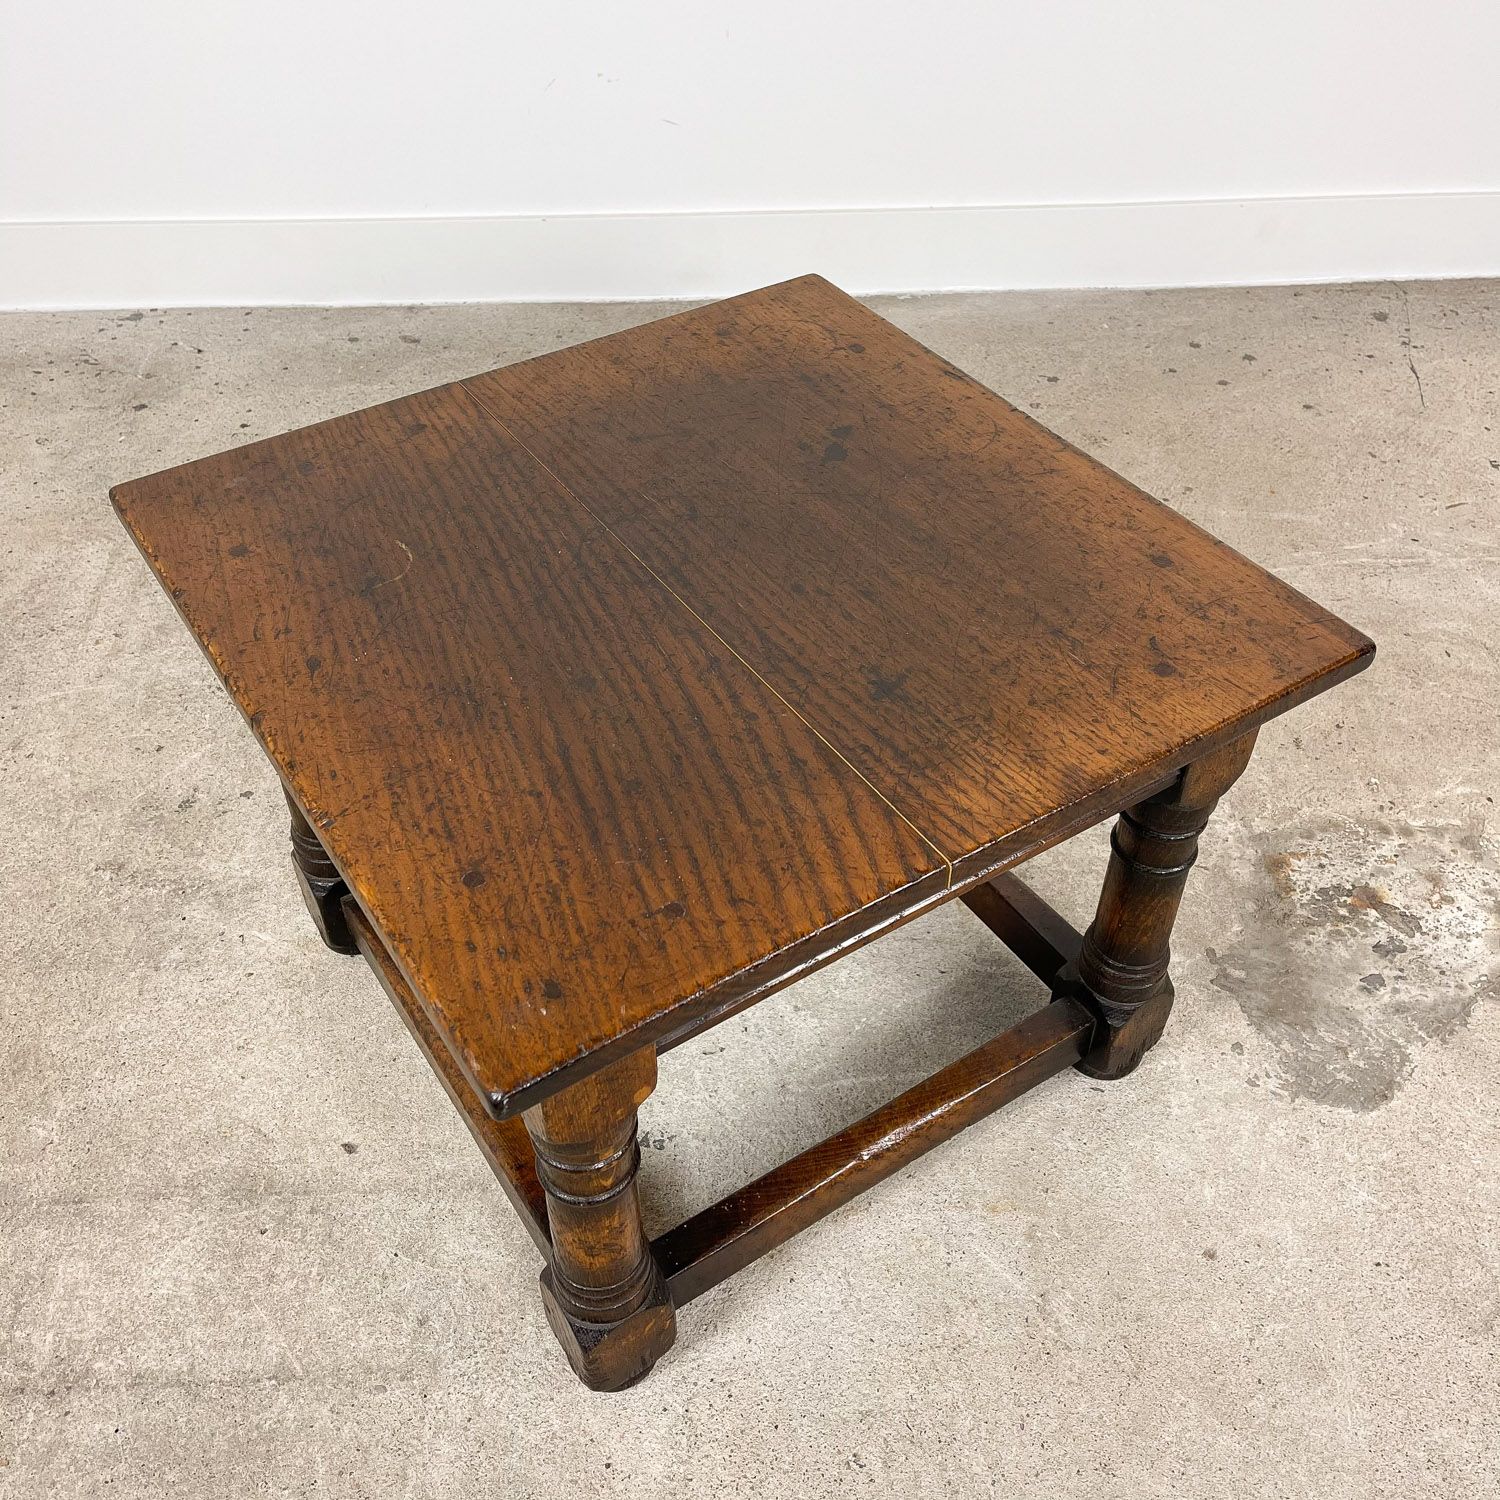 Small Square Oak Coffee Table | Old Goods With Regard To 1 Shelf Square Coffee Tables (View 15 of 15)